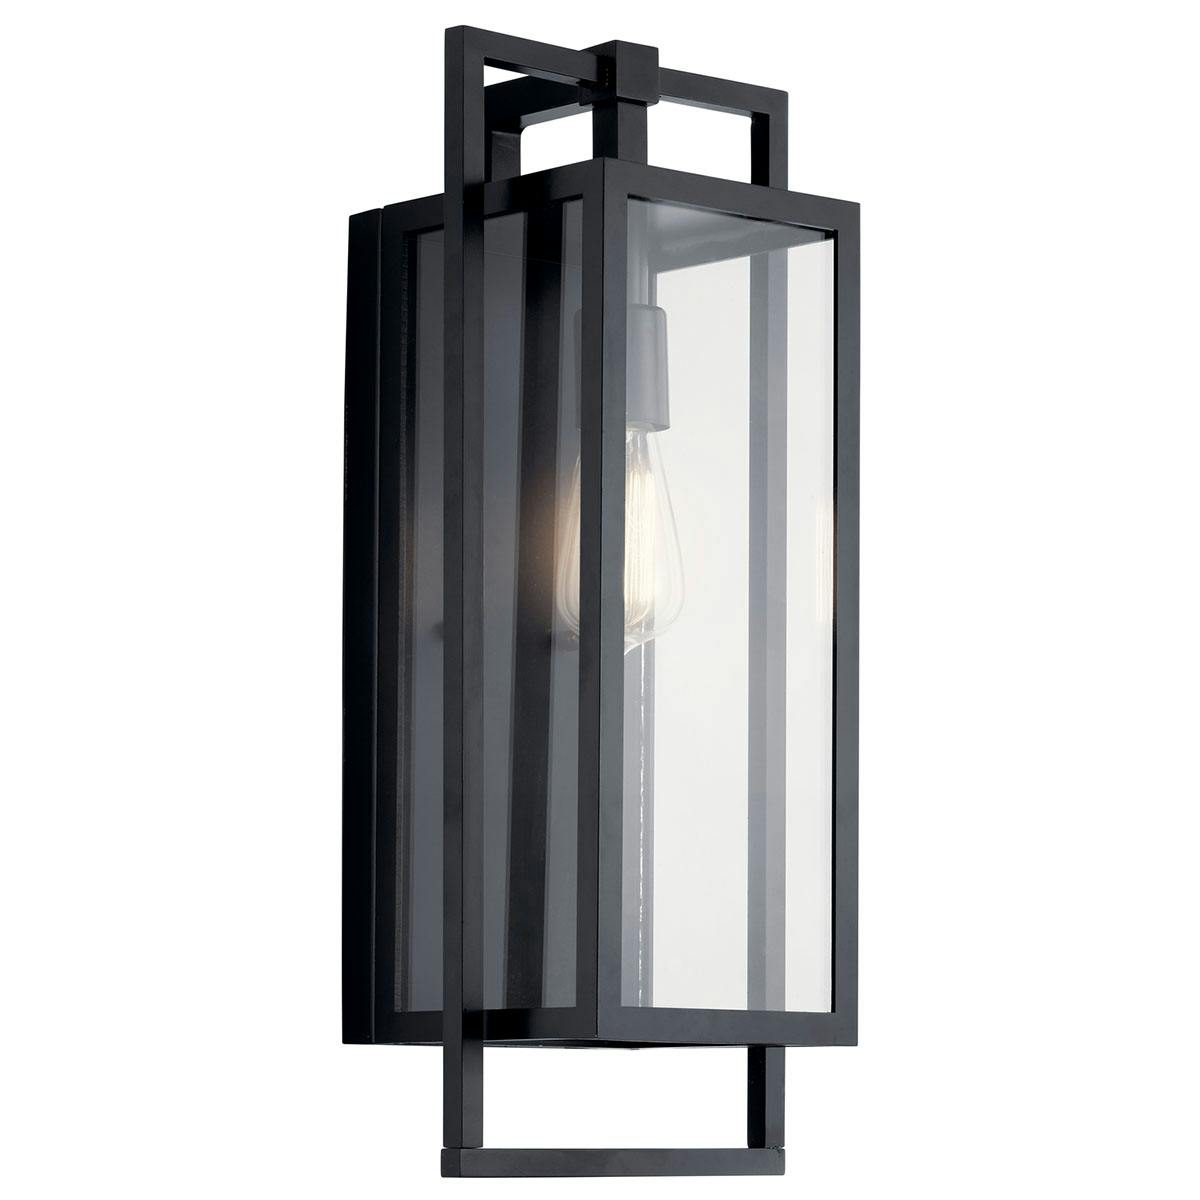 Goson 20" Wall Light in a Black finish on a white background